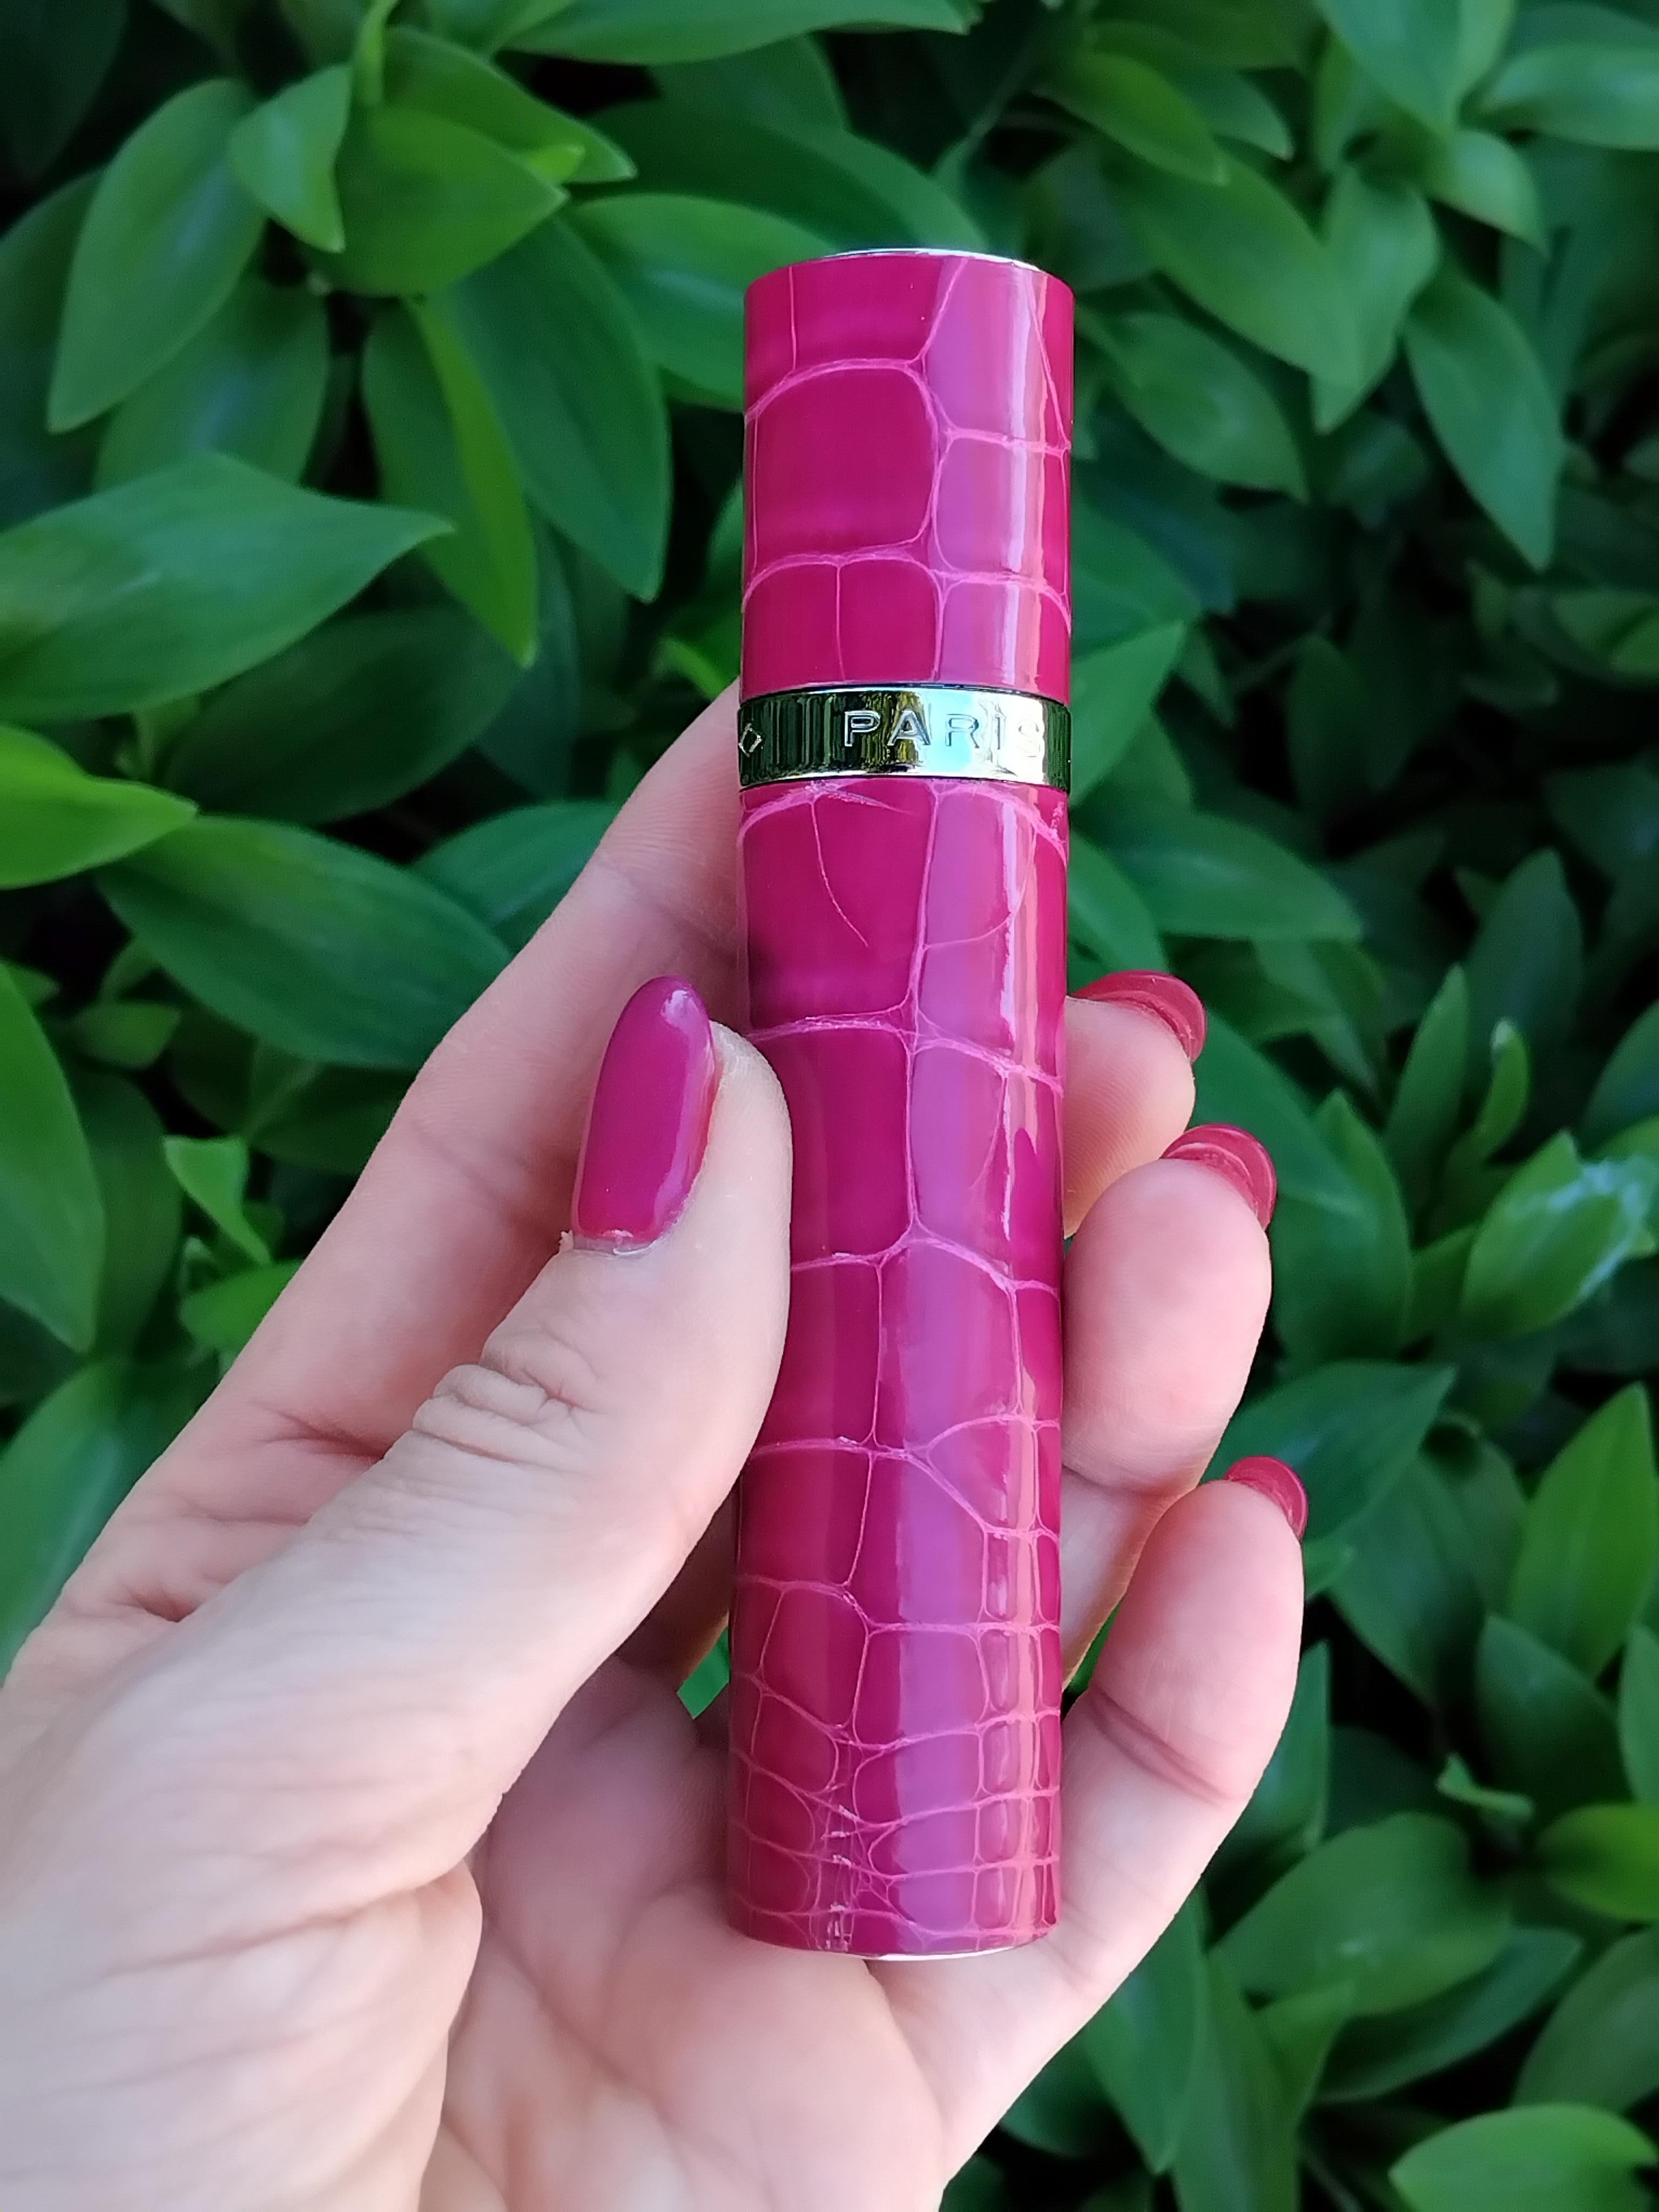 Hermès Refillable Perfume Spray and Case in Rose Pourpre Crocodile RARE For Sale 13